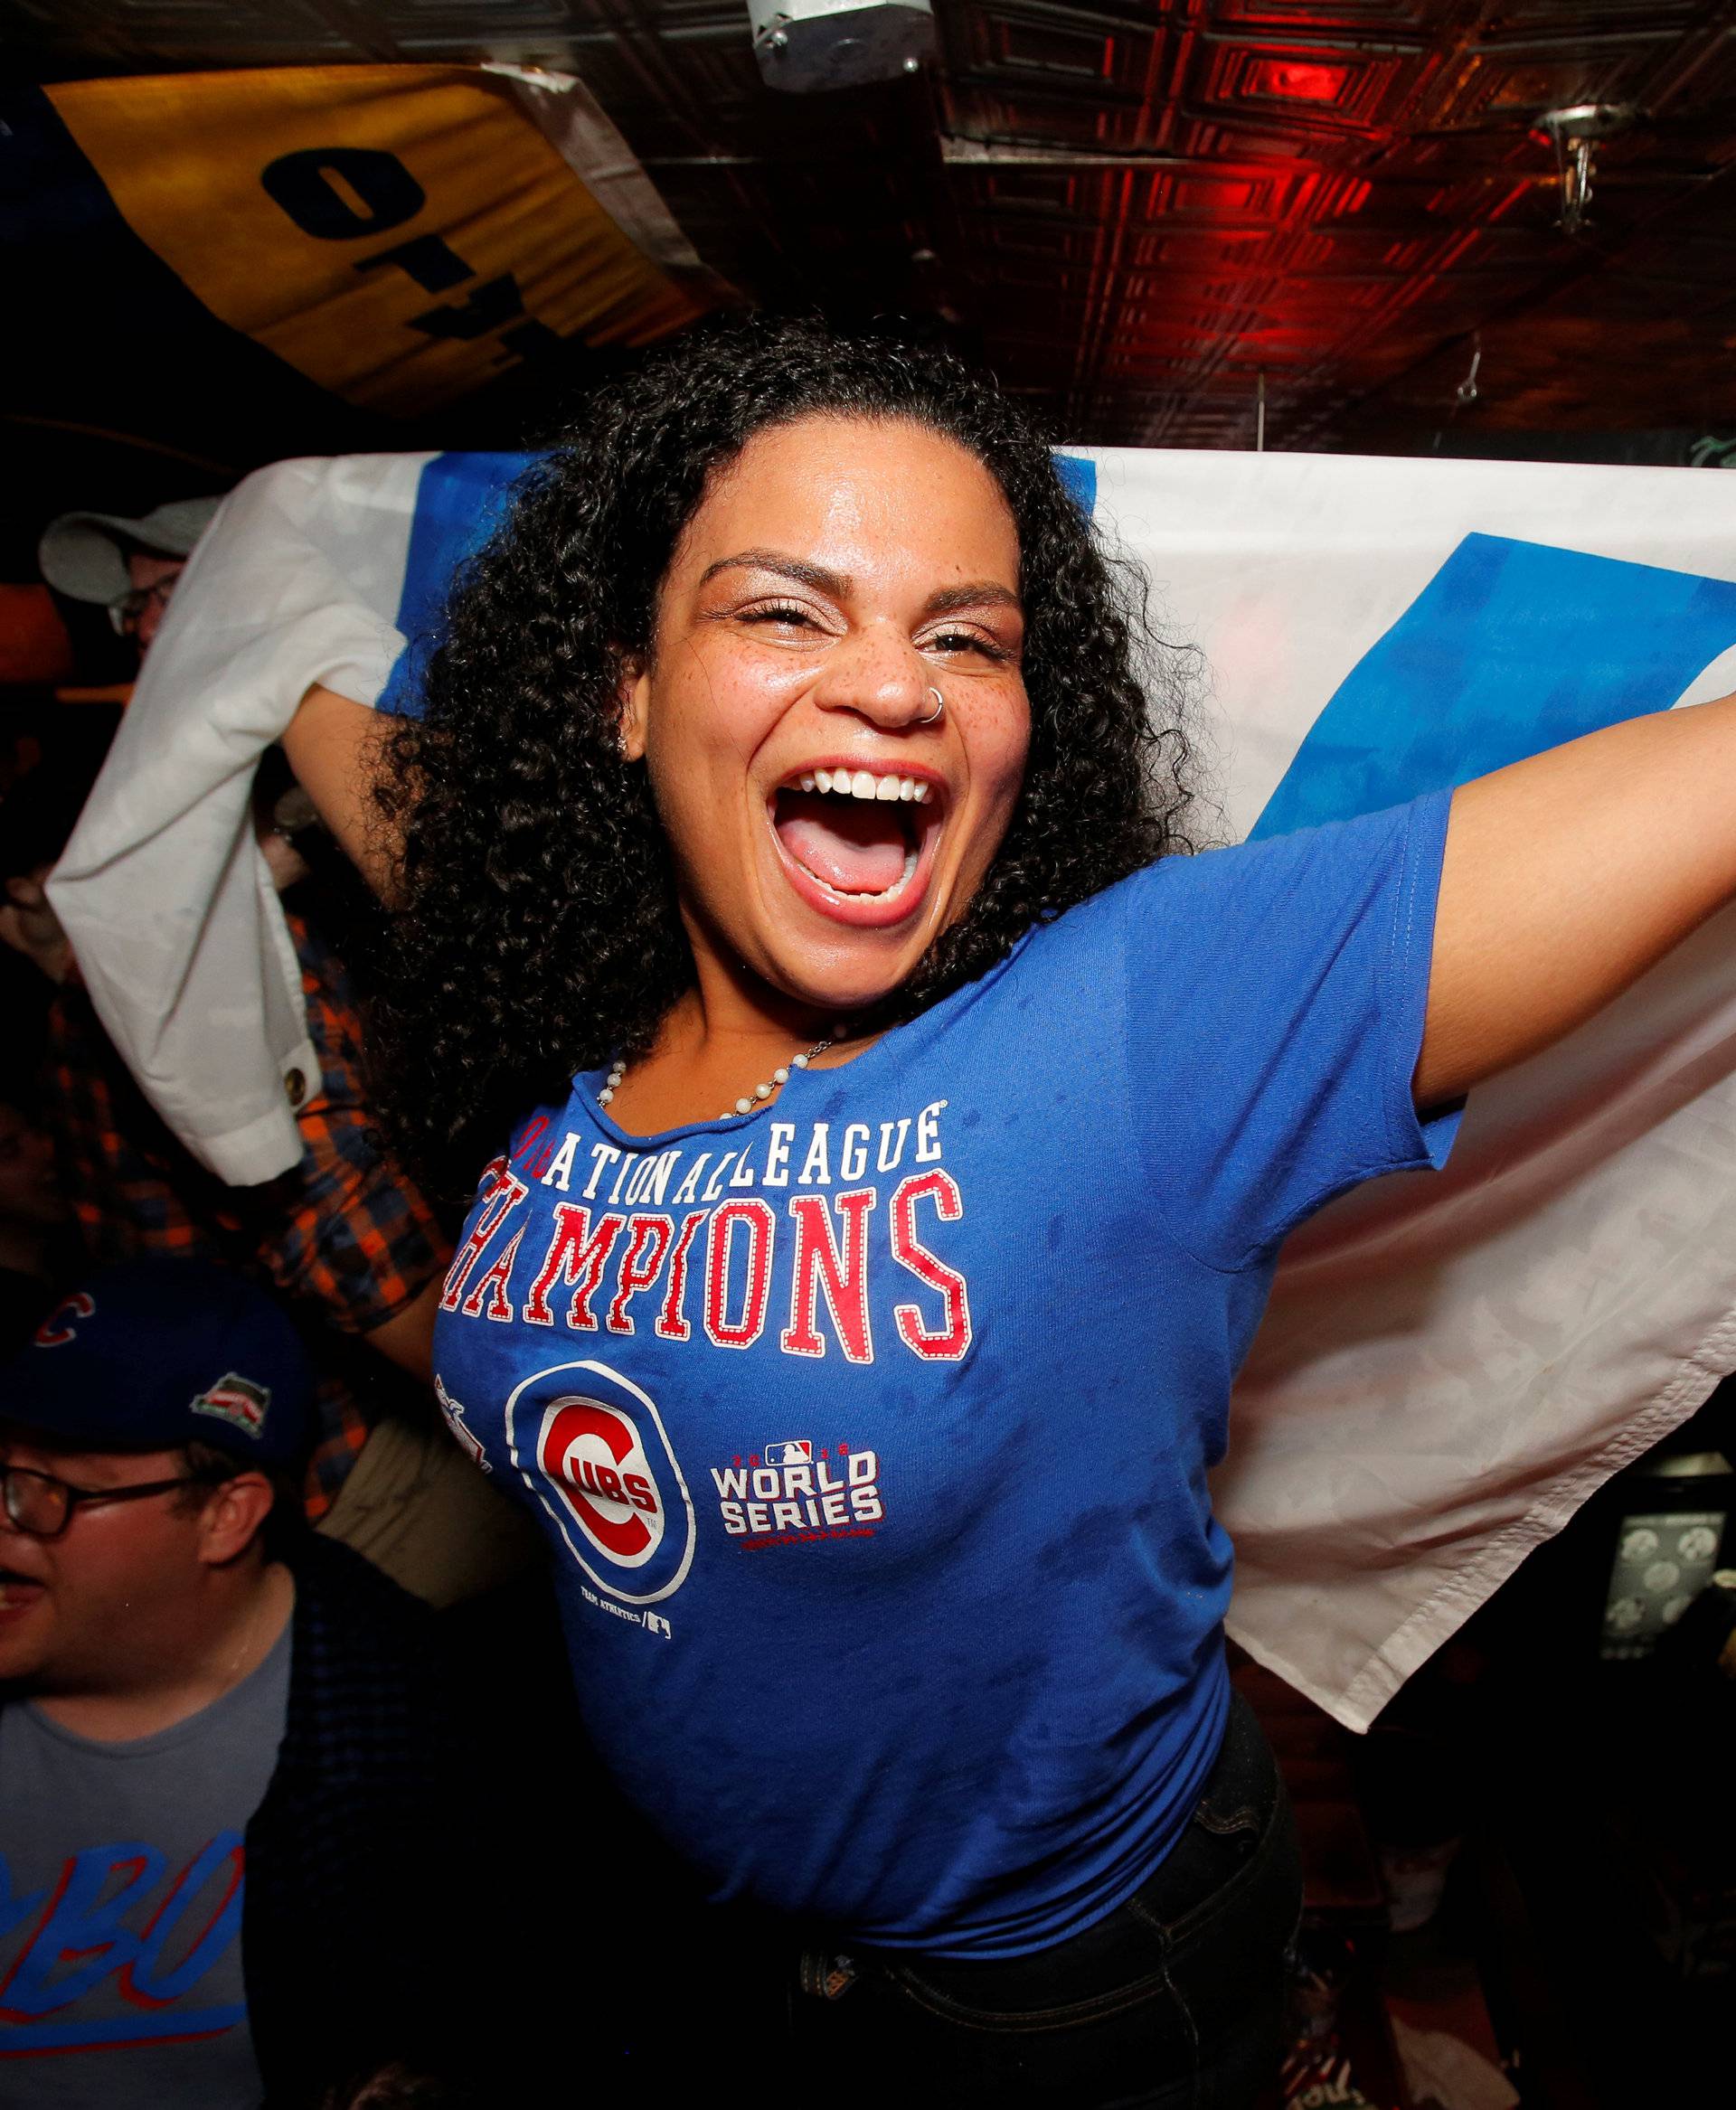 Fans of National League baseball team Chicago Cubs gathered to watch the game at Kelly's bar celebrate their Major League Baseball World Series game 7 victory against American League's Cleveland Indians in Manhattan, New York U.S.